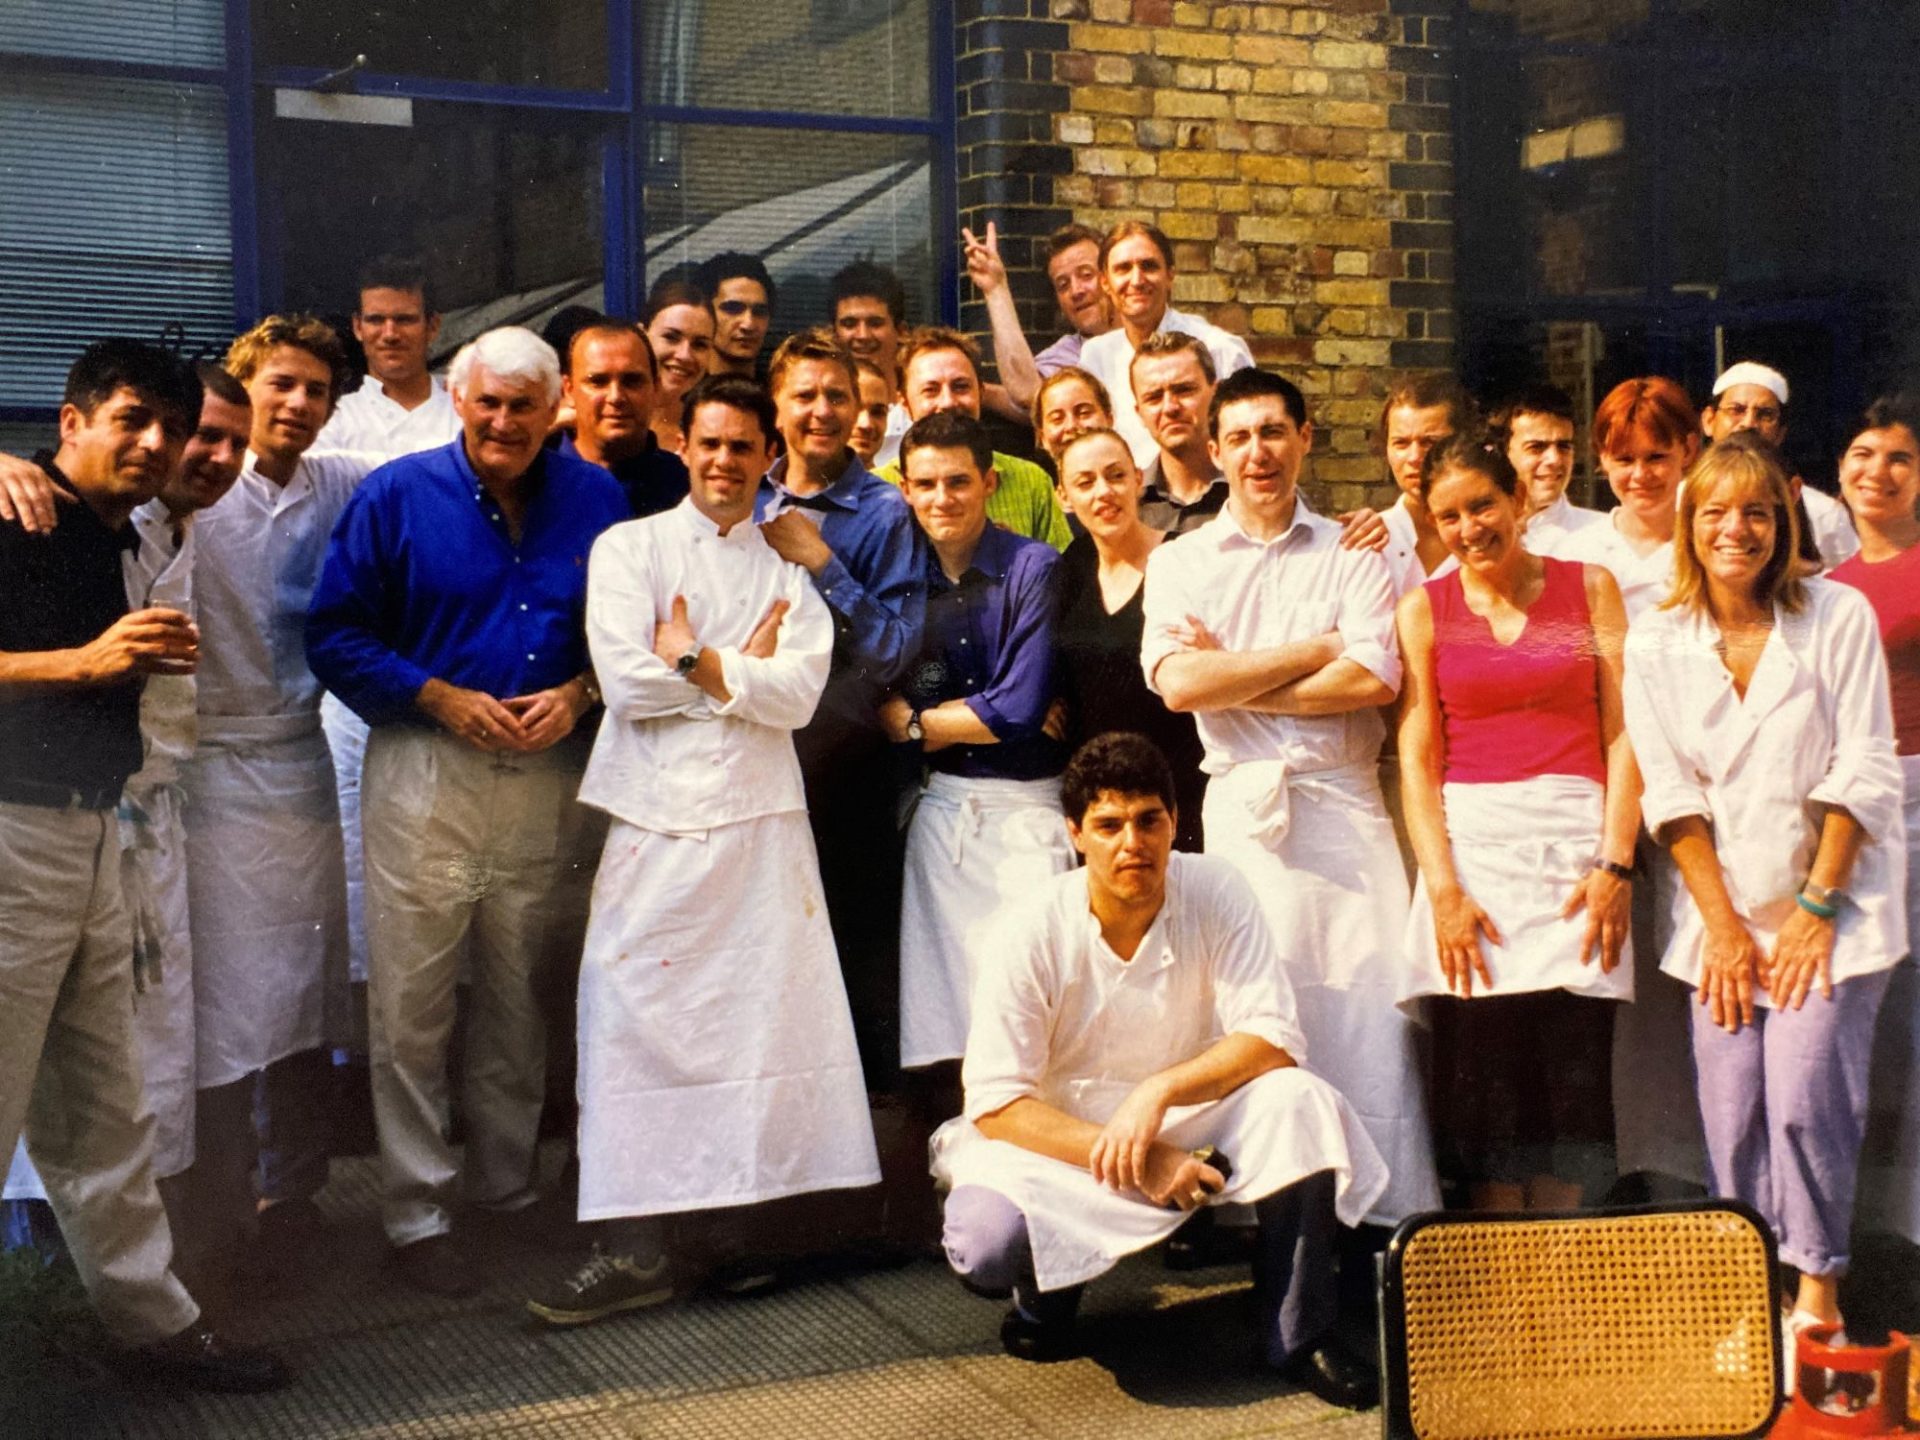 Tony Winch (fourth left) alongside a young Jamie Oliver (third left) on completion of their work at the River Café.